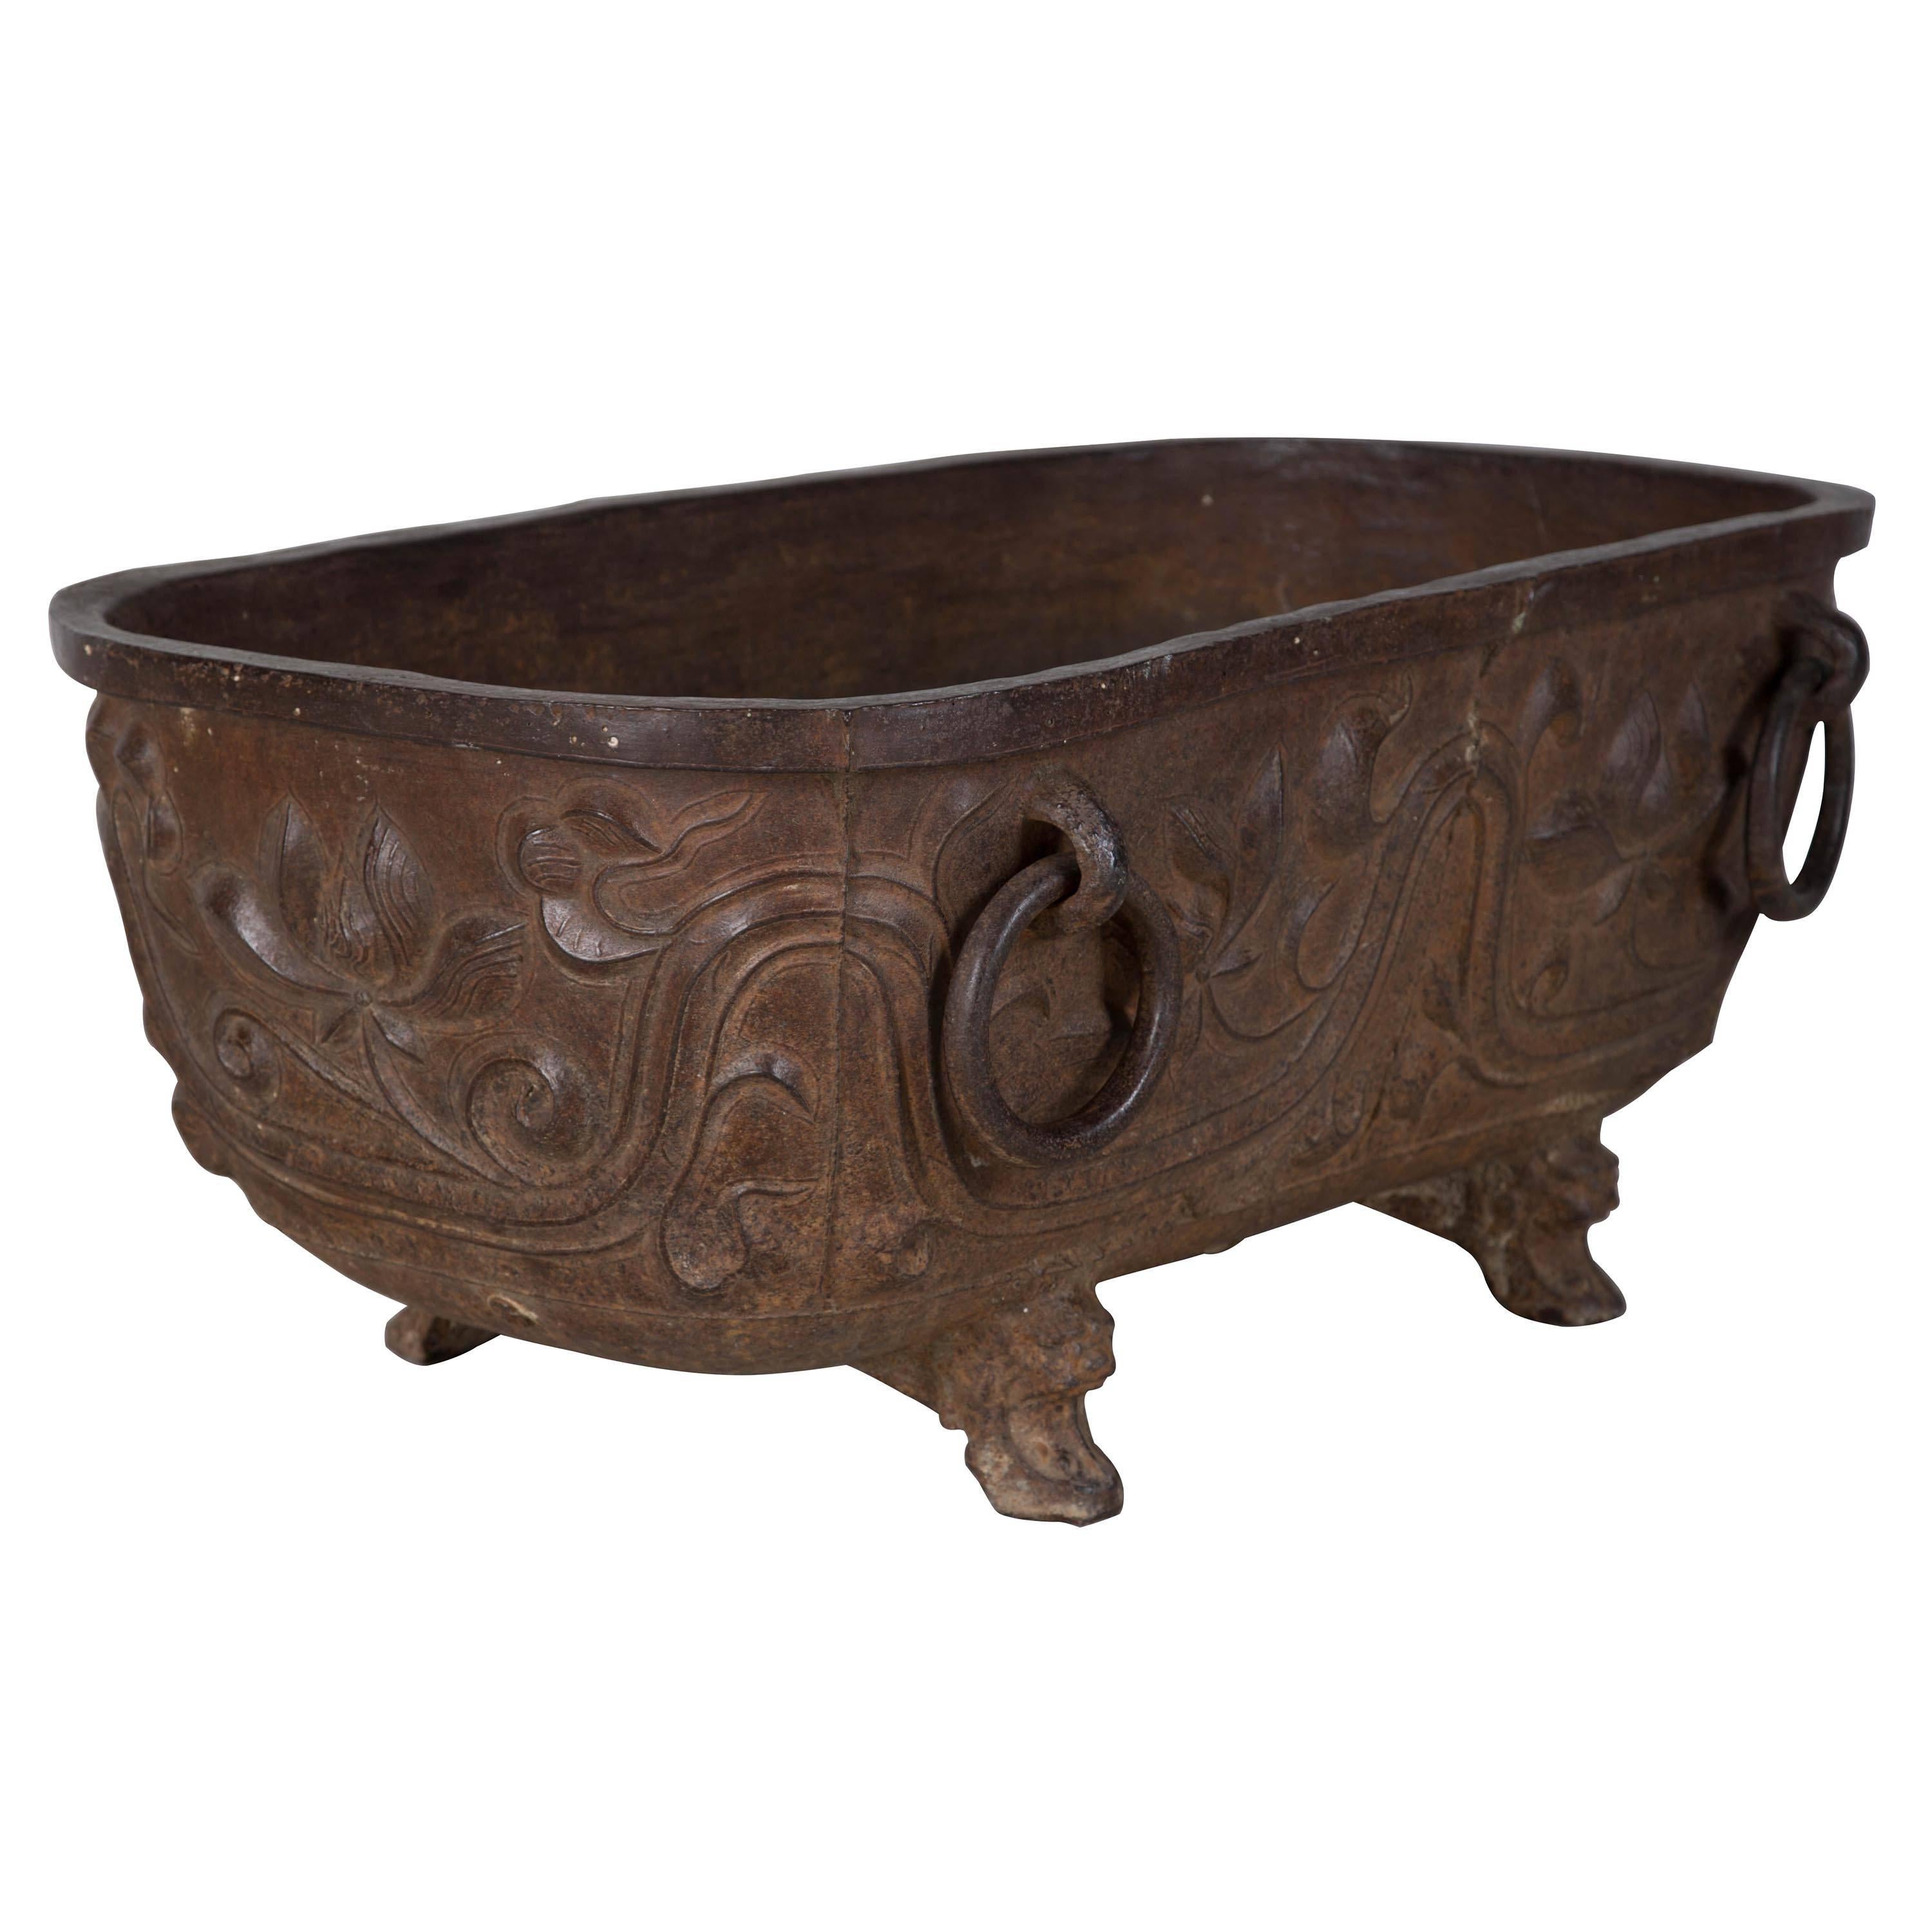 A rare and imposing cast iron cistern Chinese, 17th century.